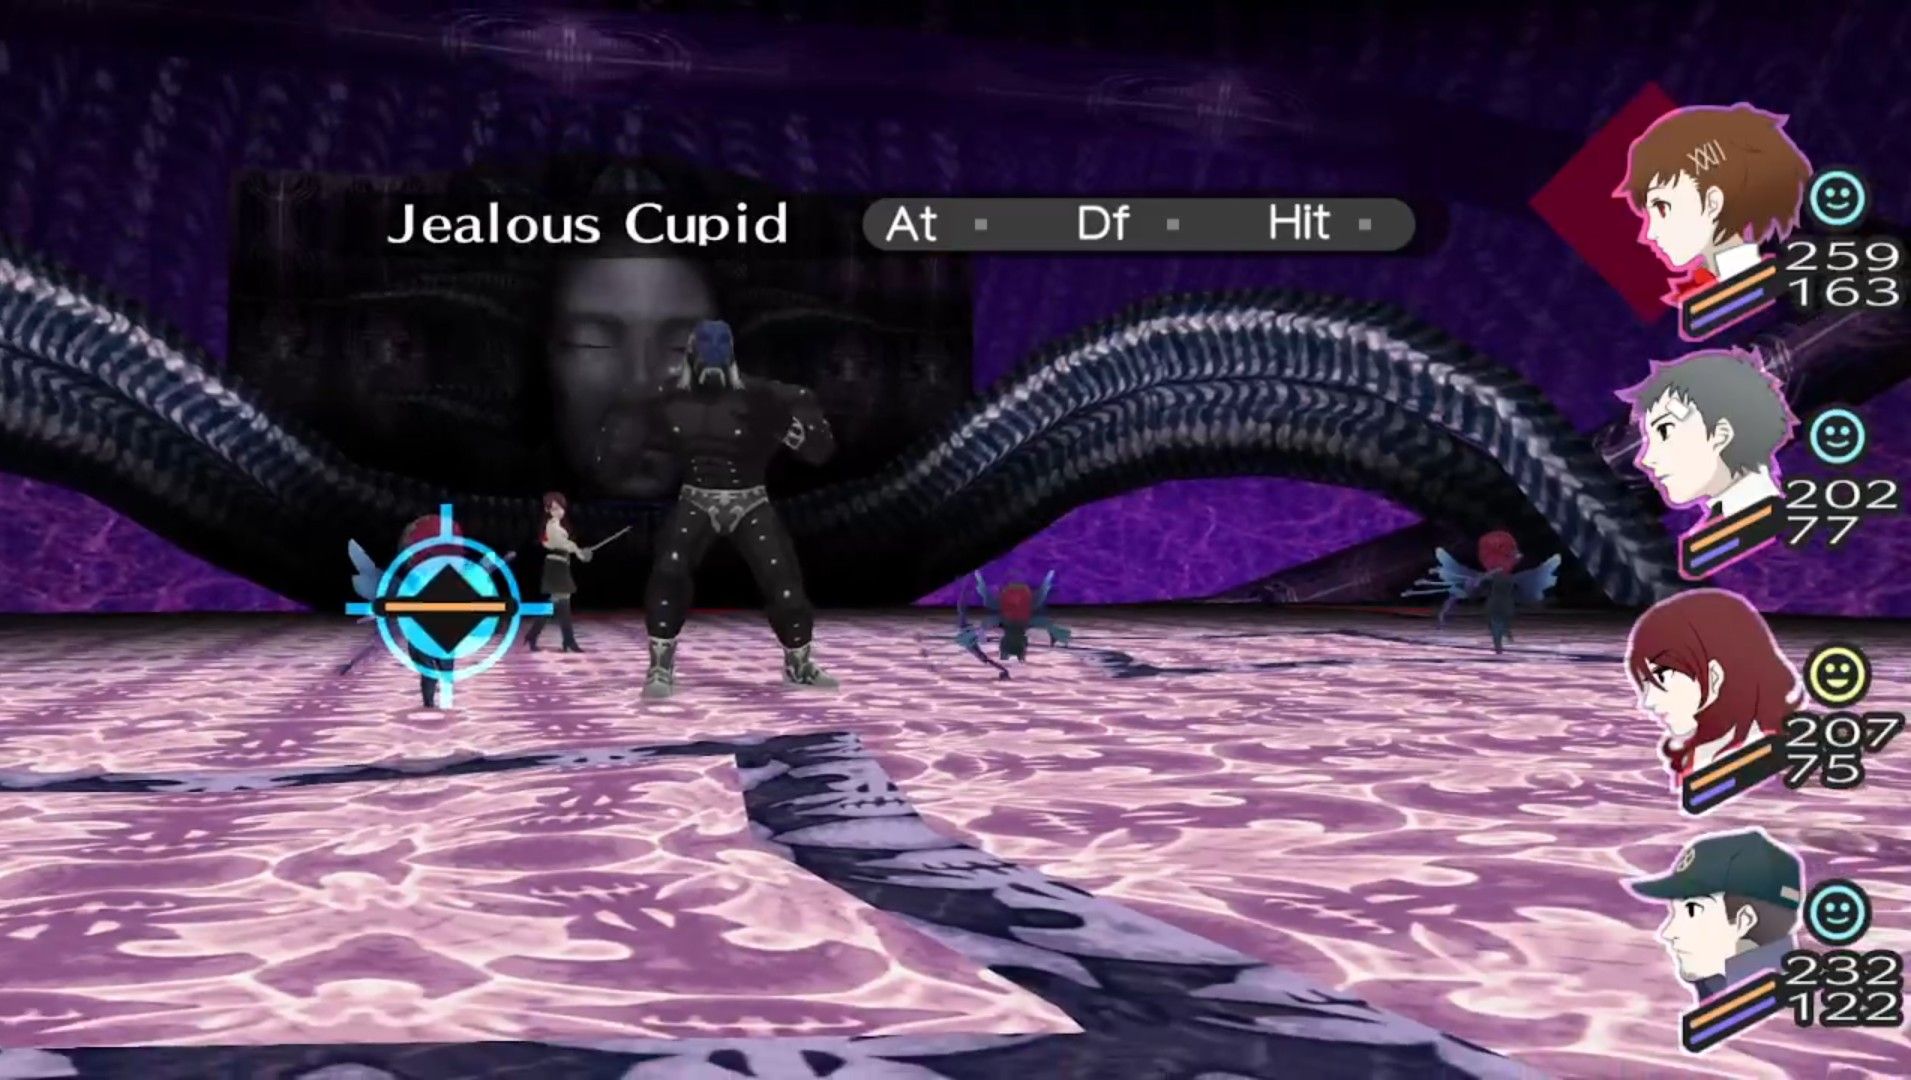 jealous cupid highlighted during a battle in the arqa block of tartarus in persona 3 portable